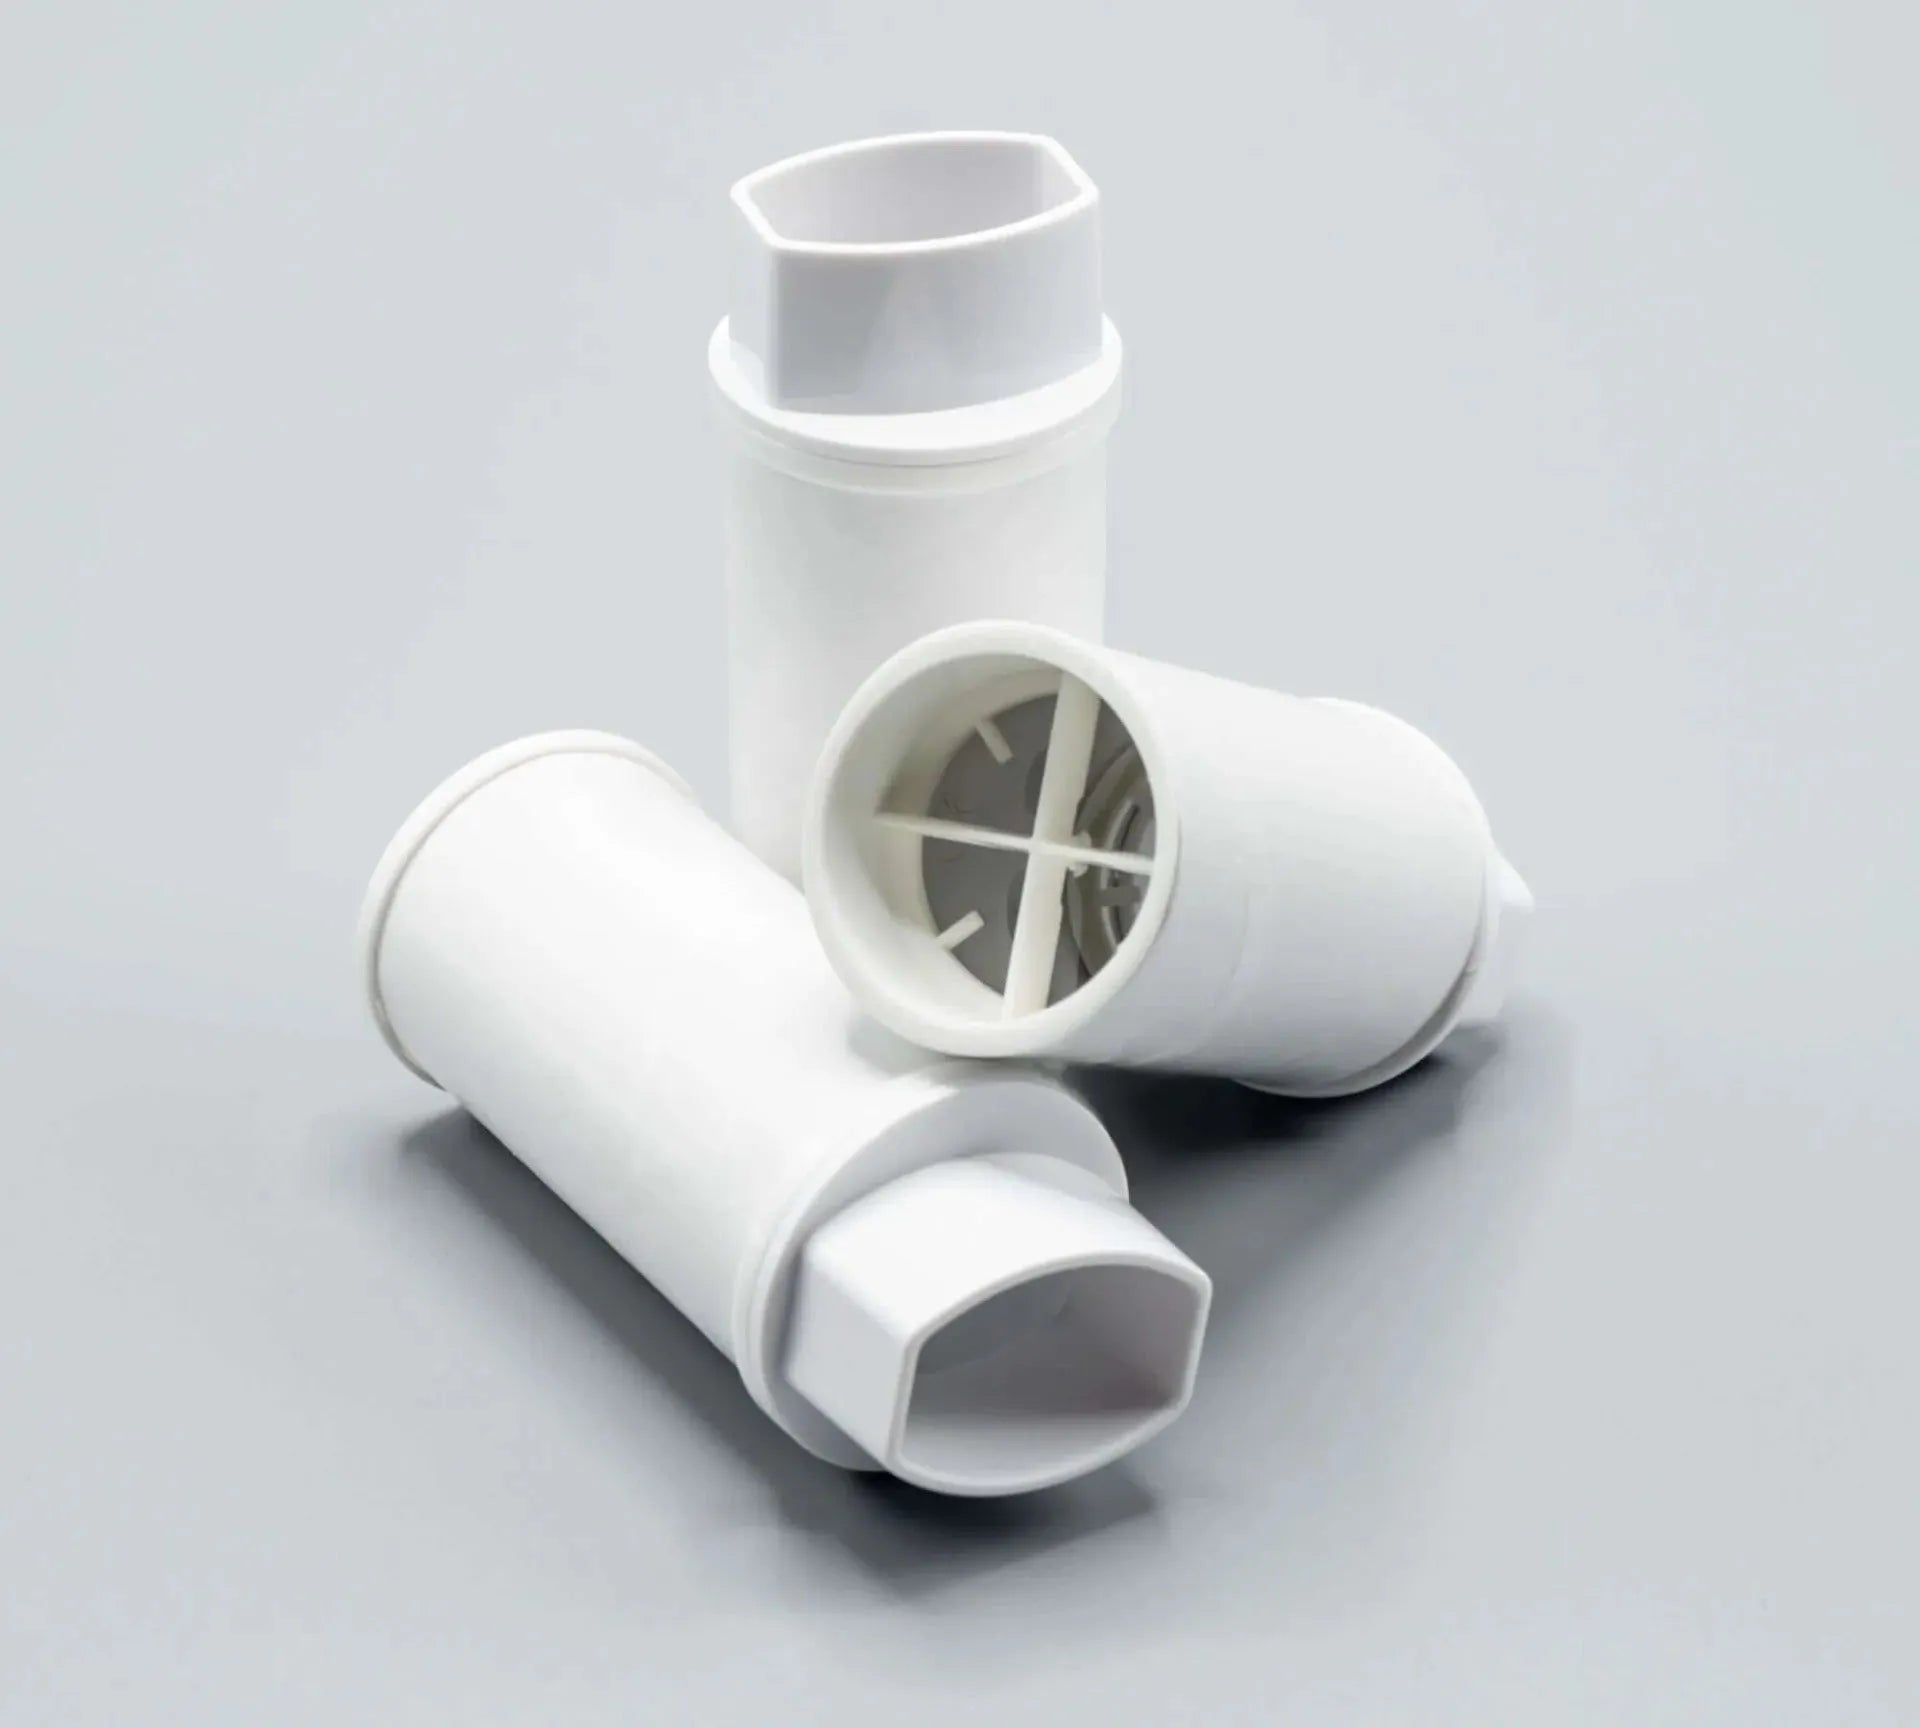 Three Disposable Inhaler (MDI) SafeTway are shown from different angles.  They are white, one-way mouthpieces.